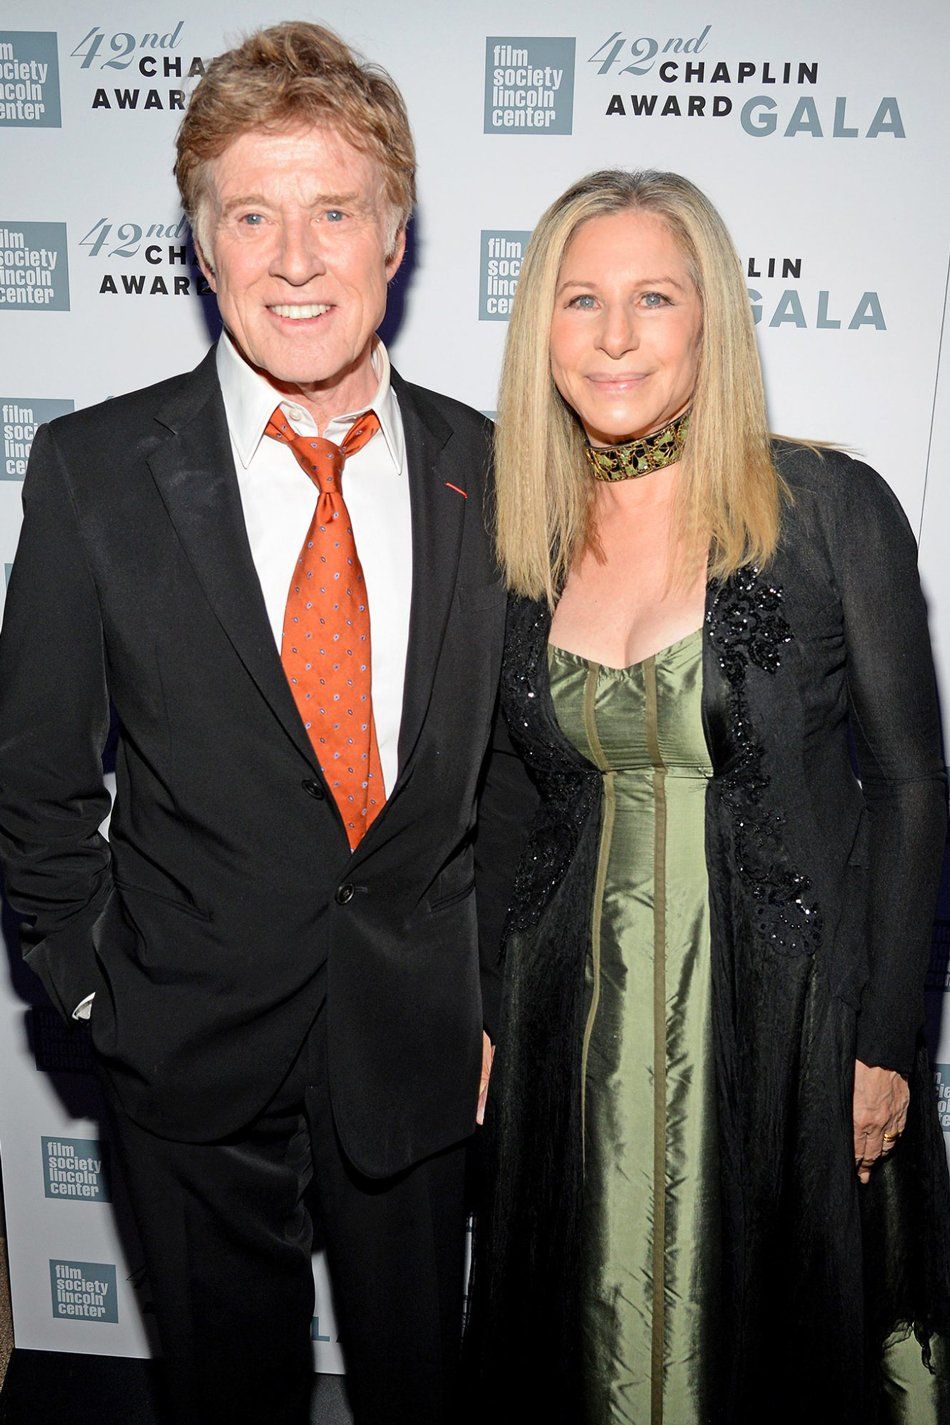 Redford and Streisand posed together in 2015 when Streisand presented him with the Chaplin Award.